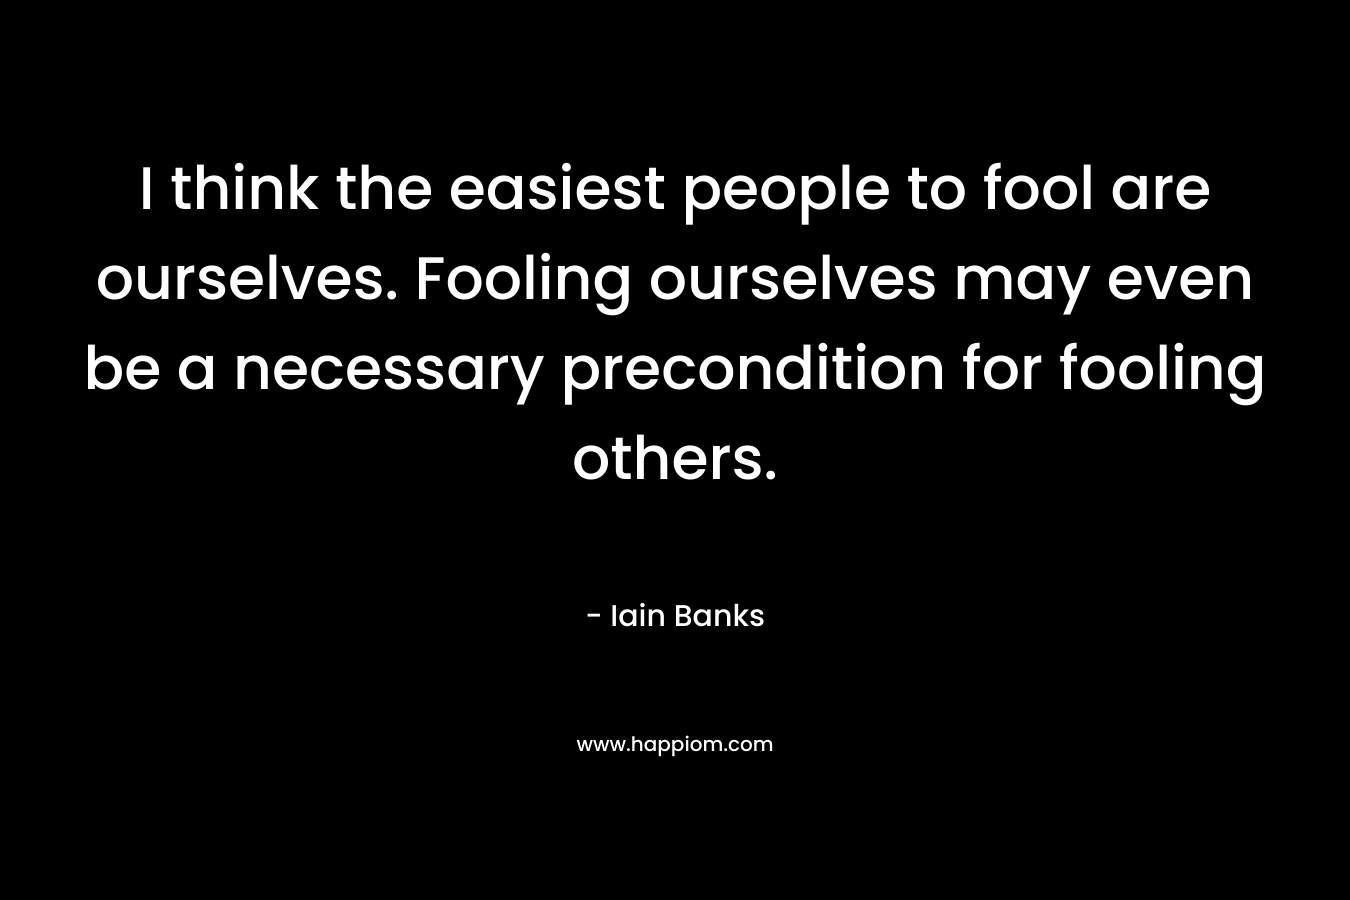 I think the easiest people to fool are ourselves. Fooling ourselves may even be a necessary precondition for fooling others. – Iain Banks